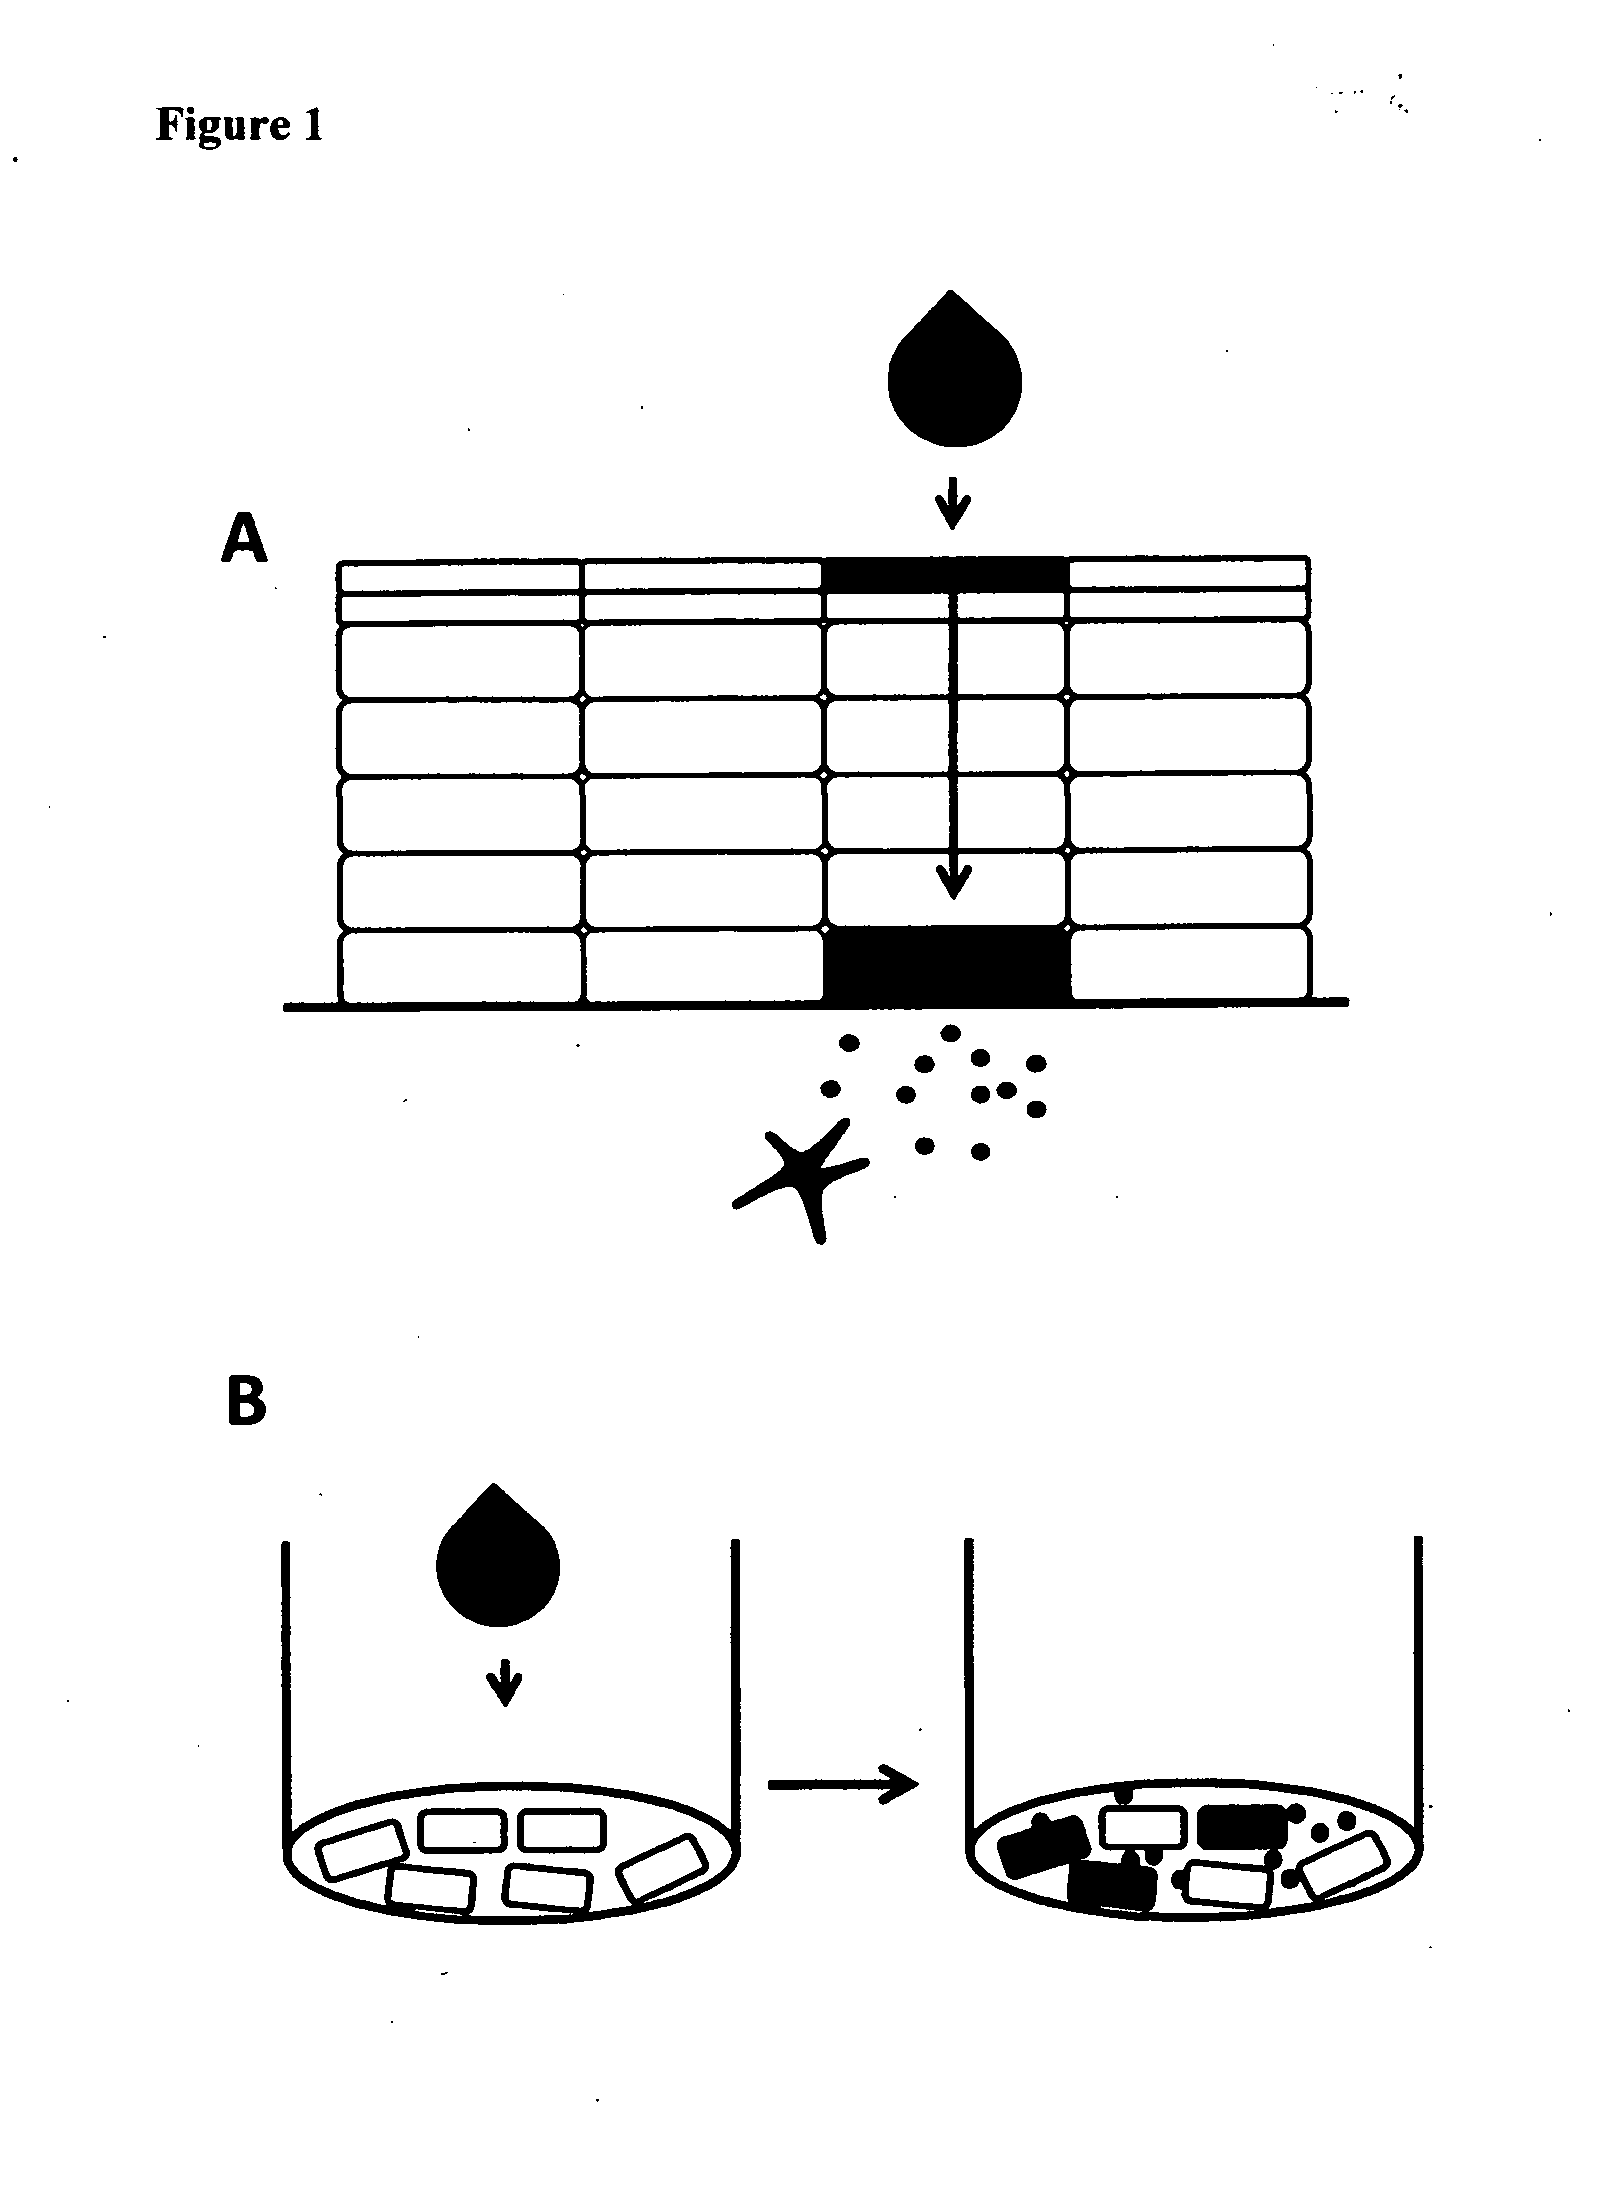 Method for diagnosing and creating immunogenic tolerance in contact allergy and other epithelial immunotoxicological ailments